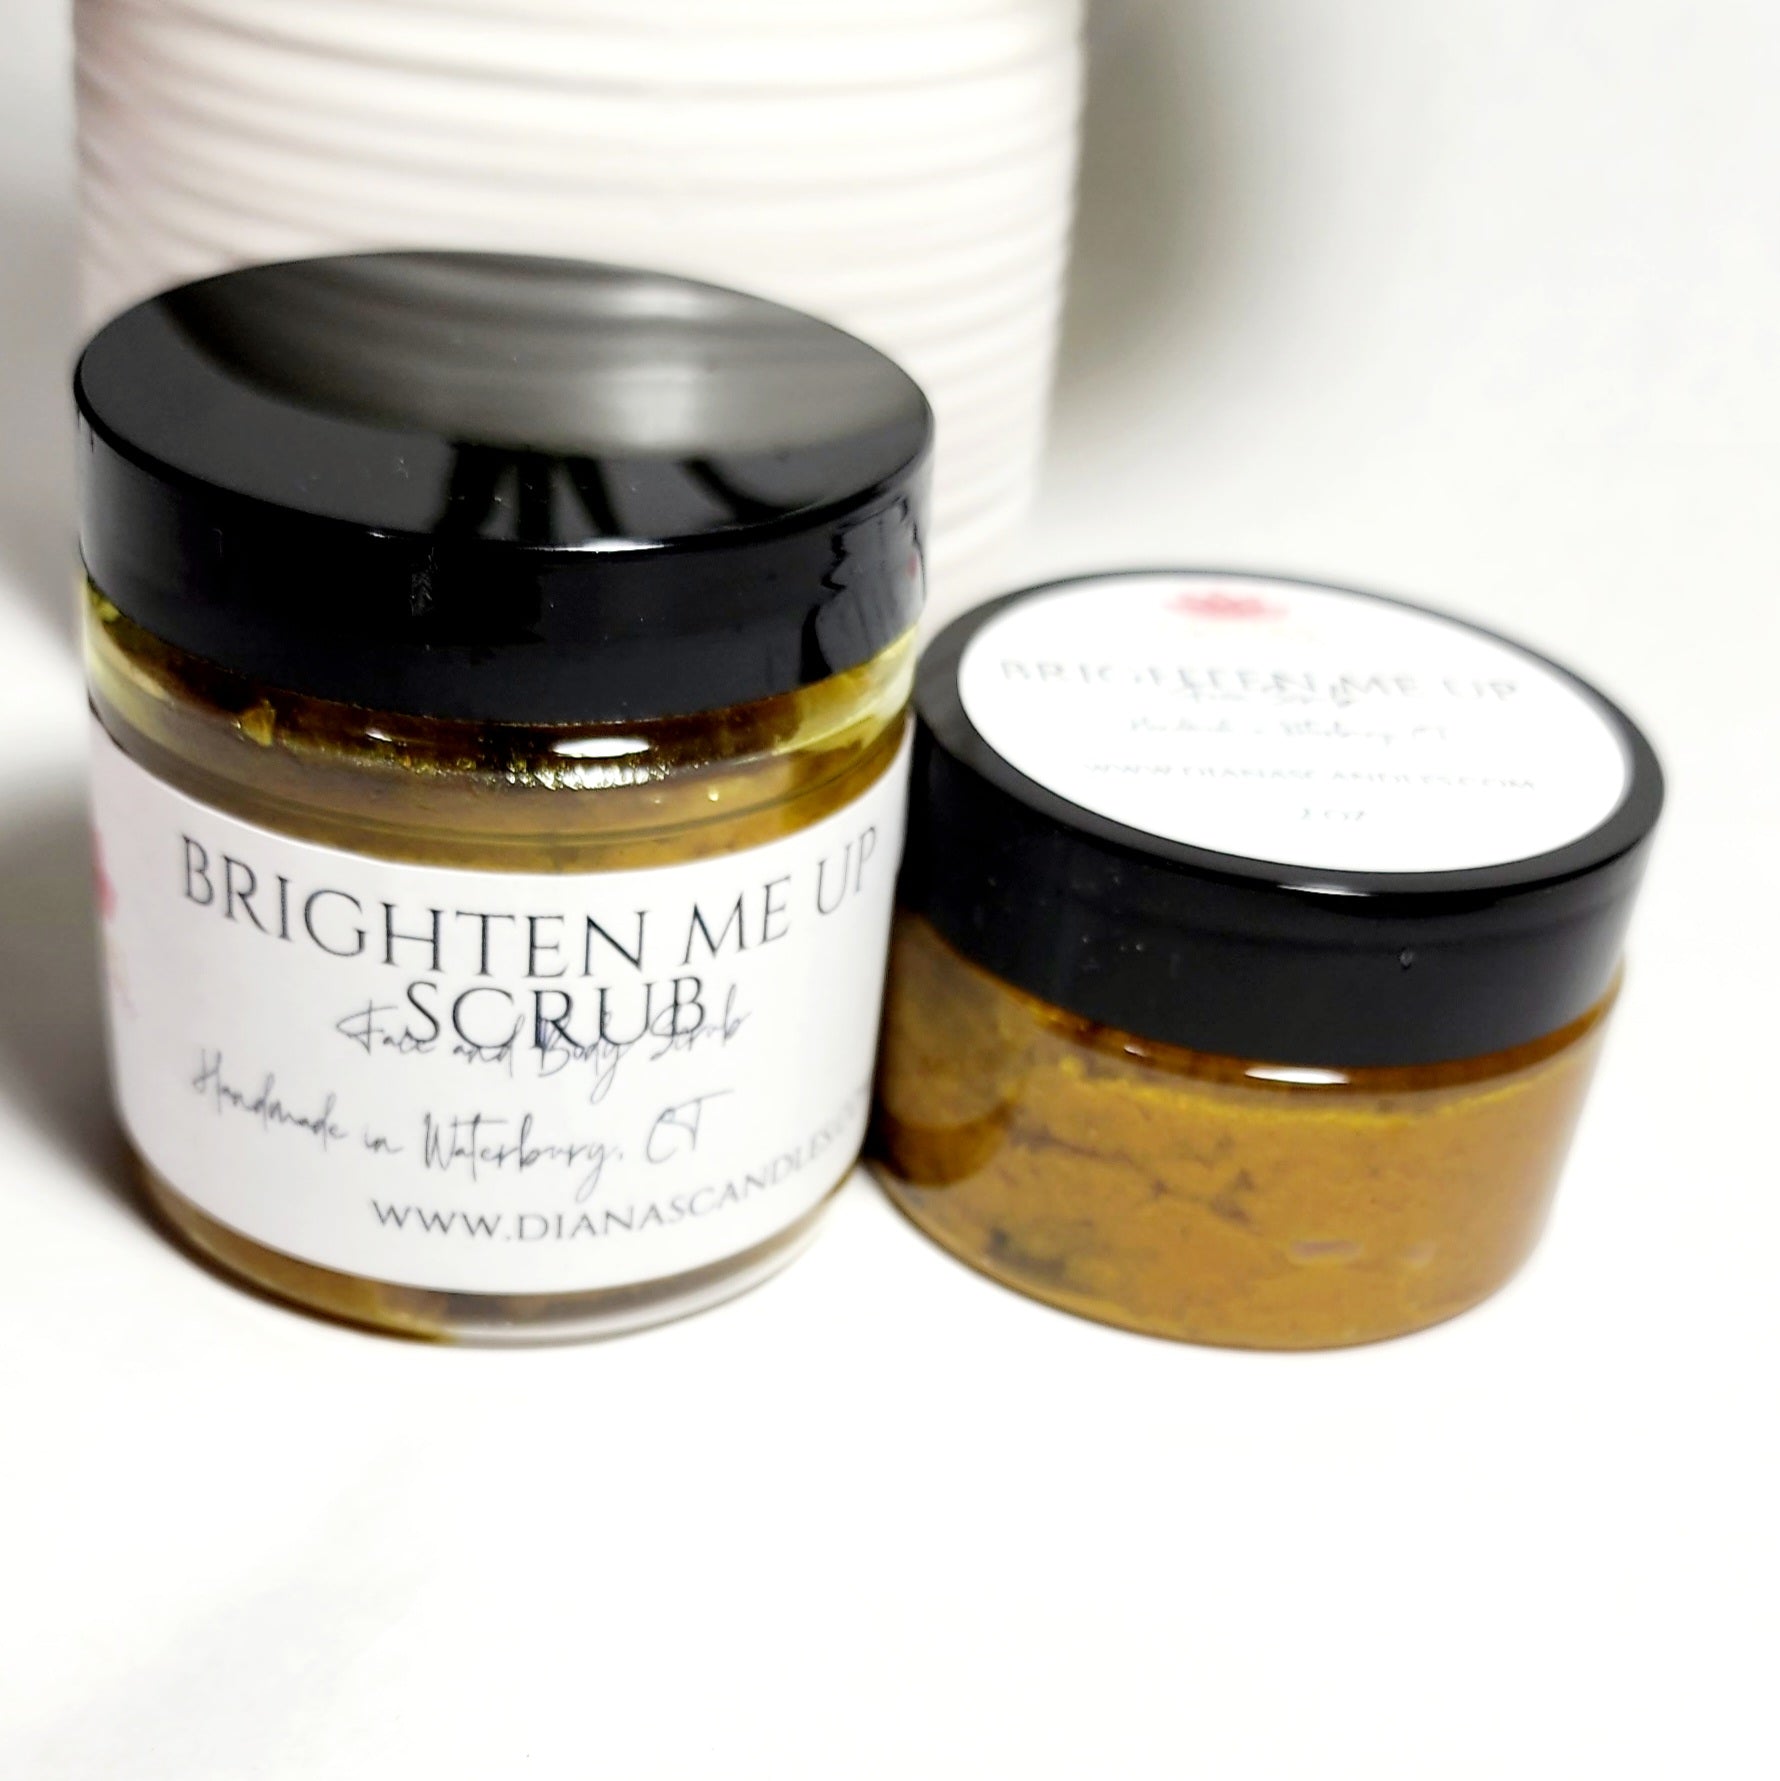 Brighten Me Up Scrub Diana's Candles and Soaps 